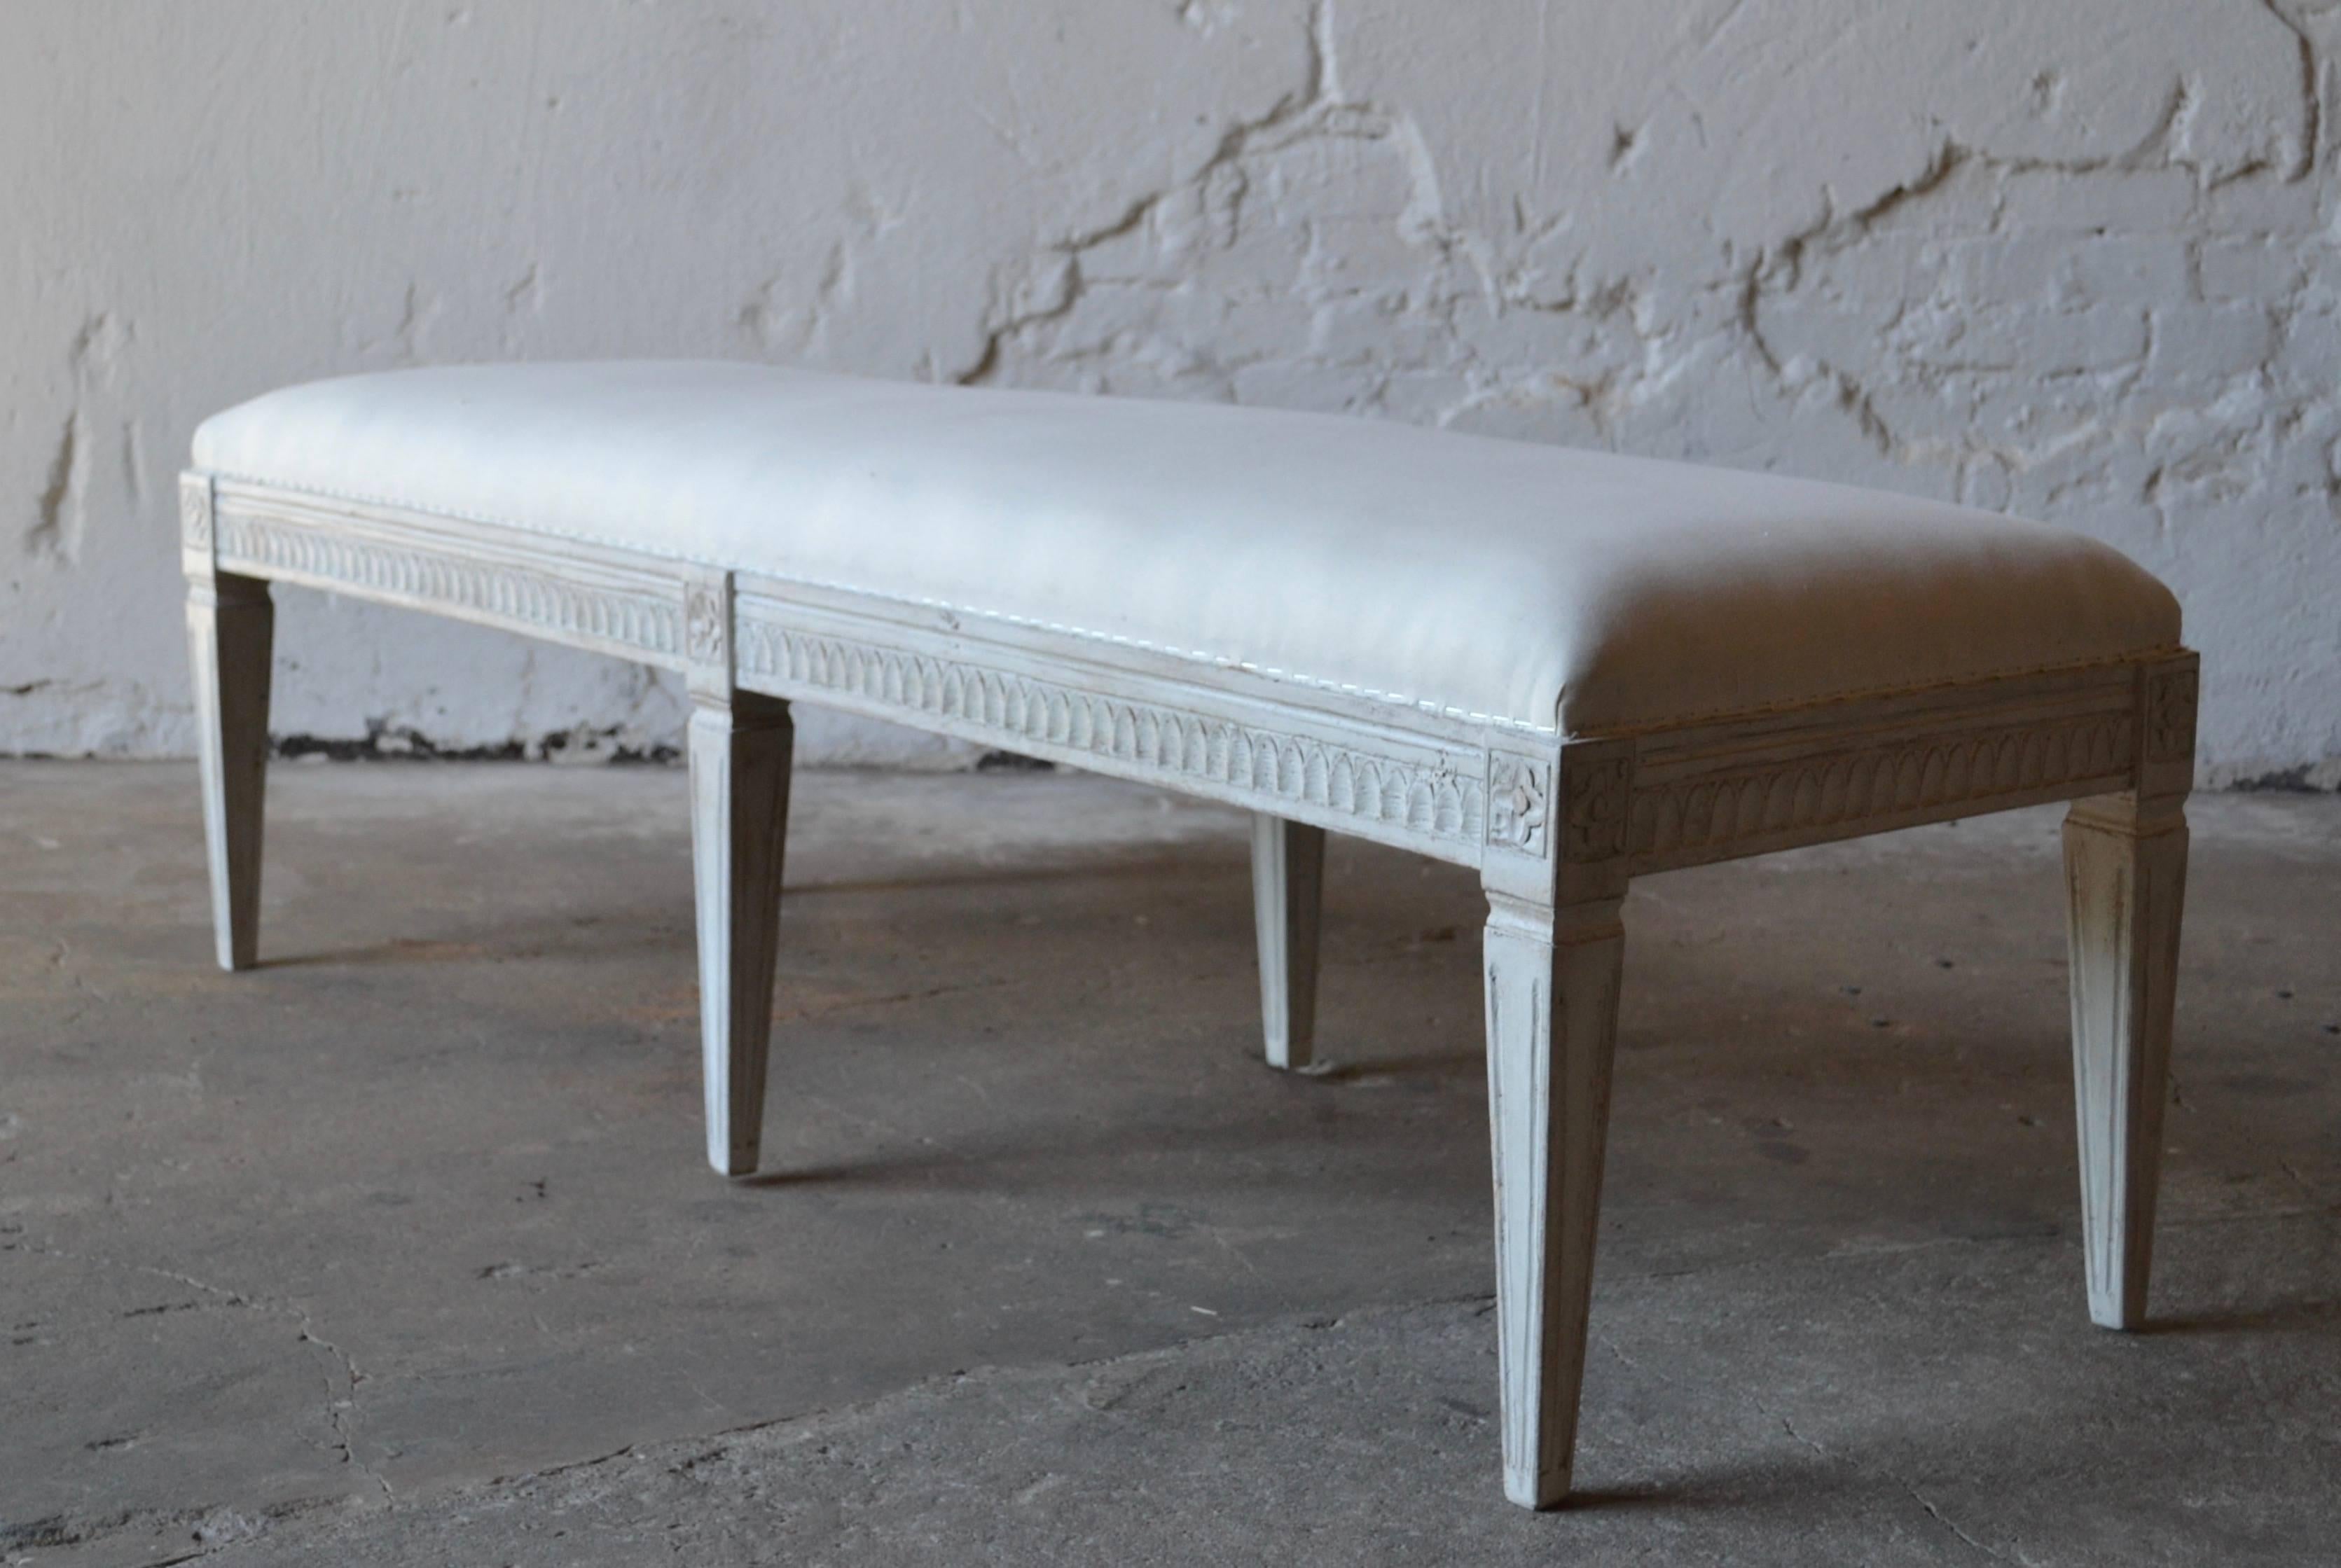 Antique Swedish Gustavian painted bench, with carved lamb's tongue apron, square tapered legs with carved flower rosettes at top of each leg. The bench is painted in a white-greyish color and distressed finish.
Renewed upholstery and textile.

 